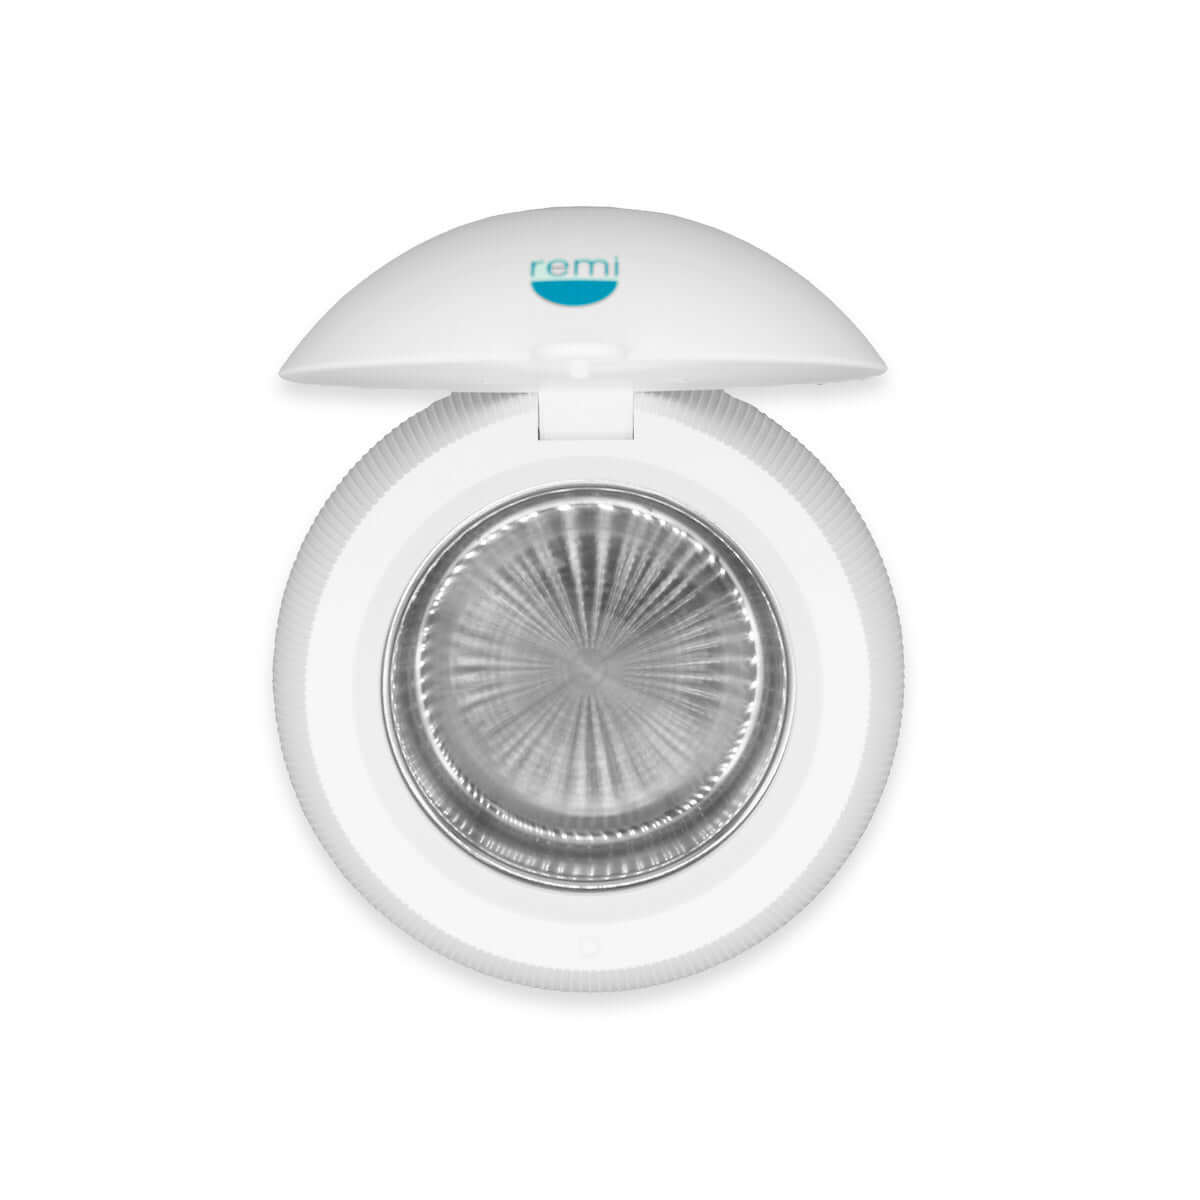 An image of an Ultrasonic Cleaning & Sanitizing Device on a blue background ideal for oral care routine.